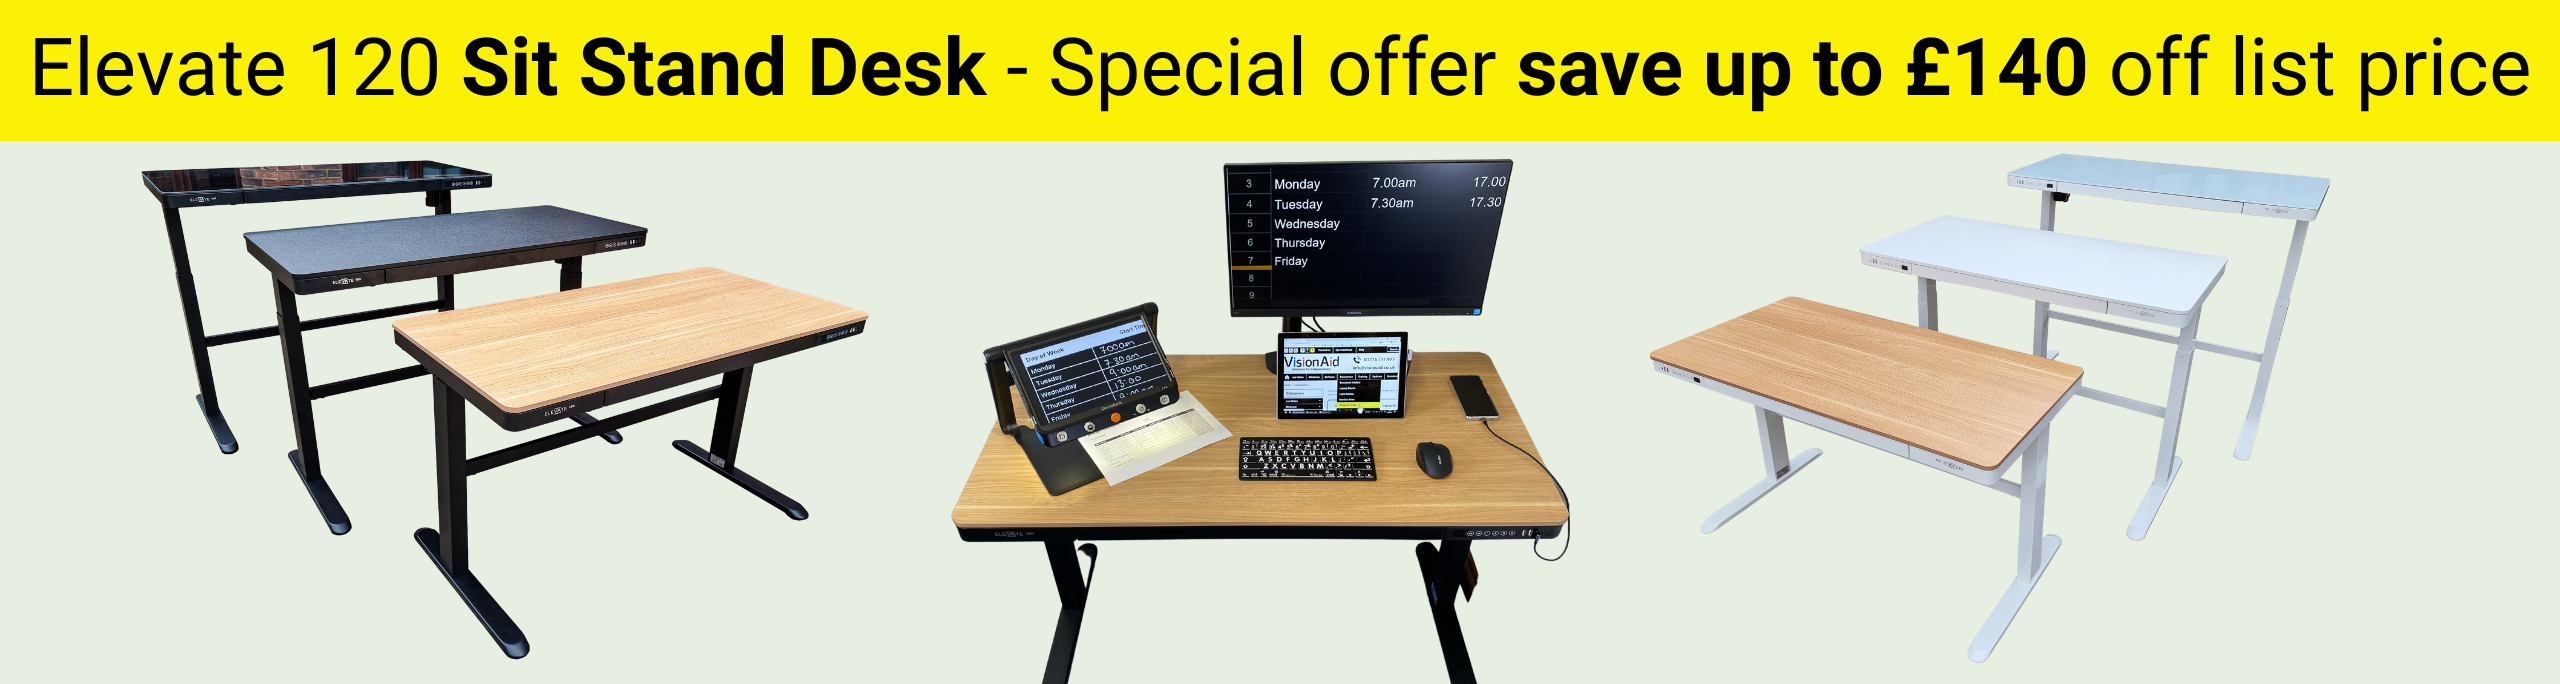 Elevate 120 Sit Stand Desk - Special offer save up to £140 off list price